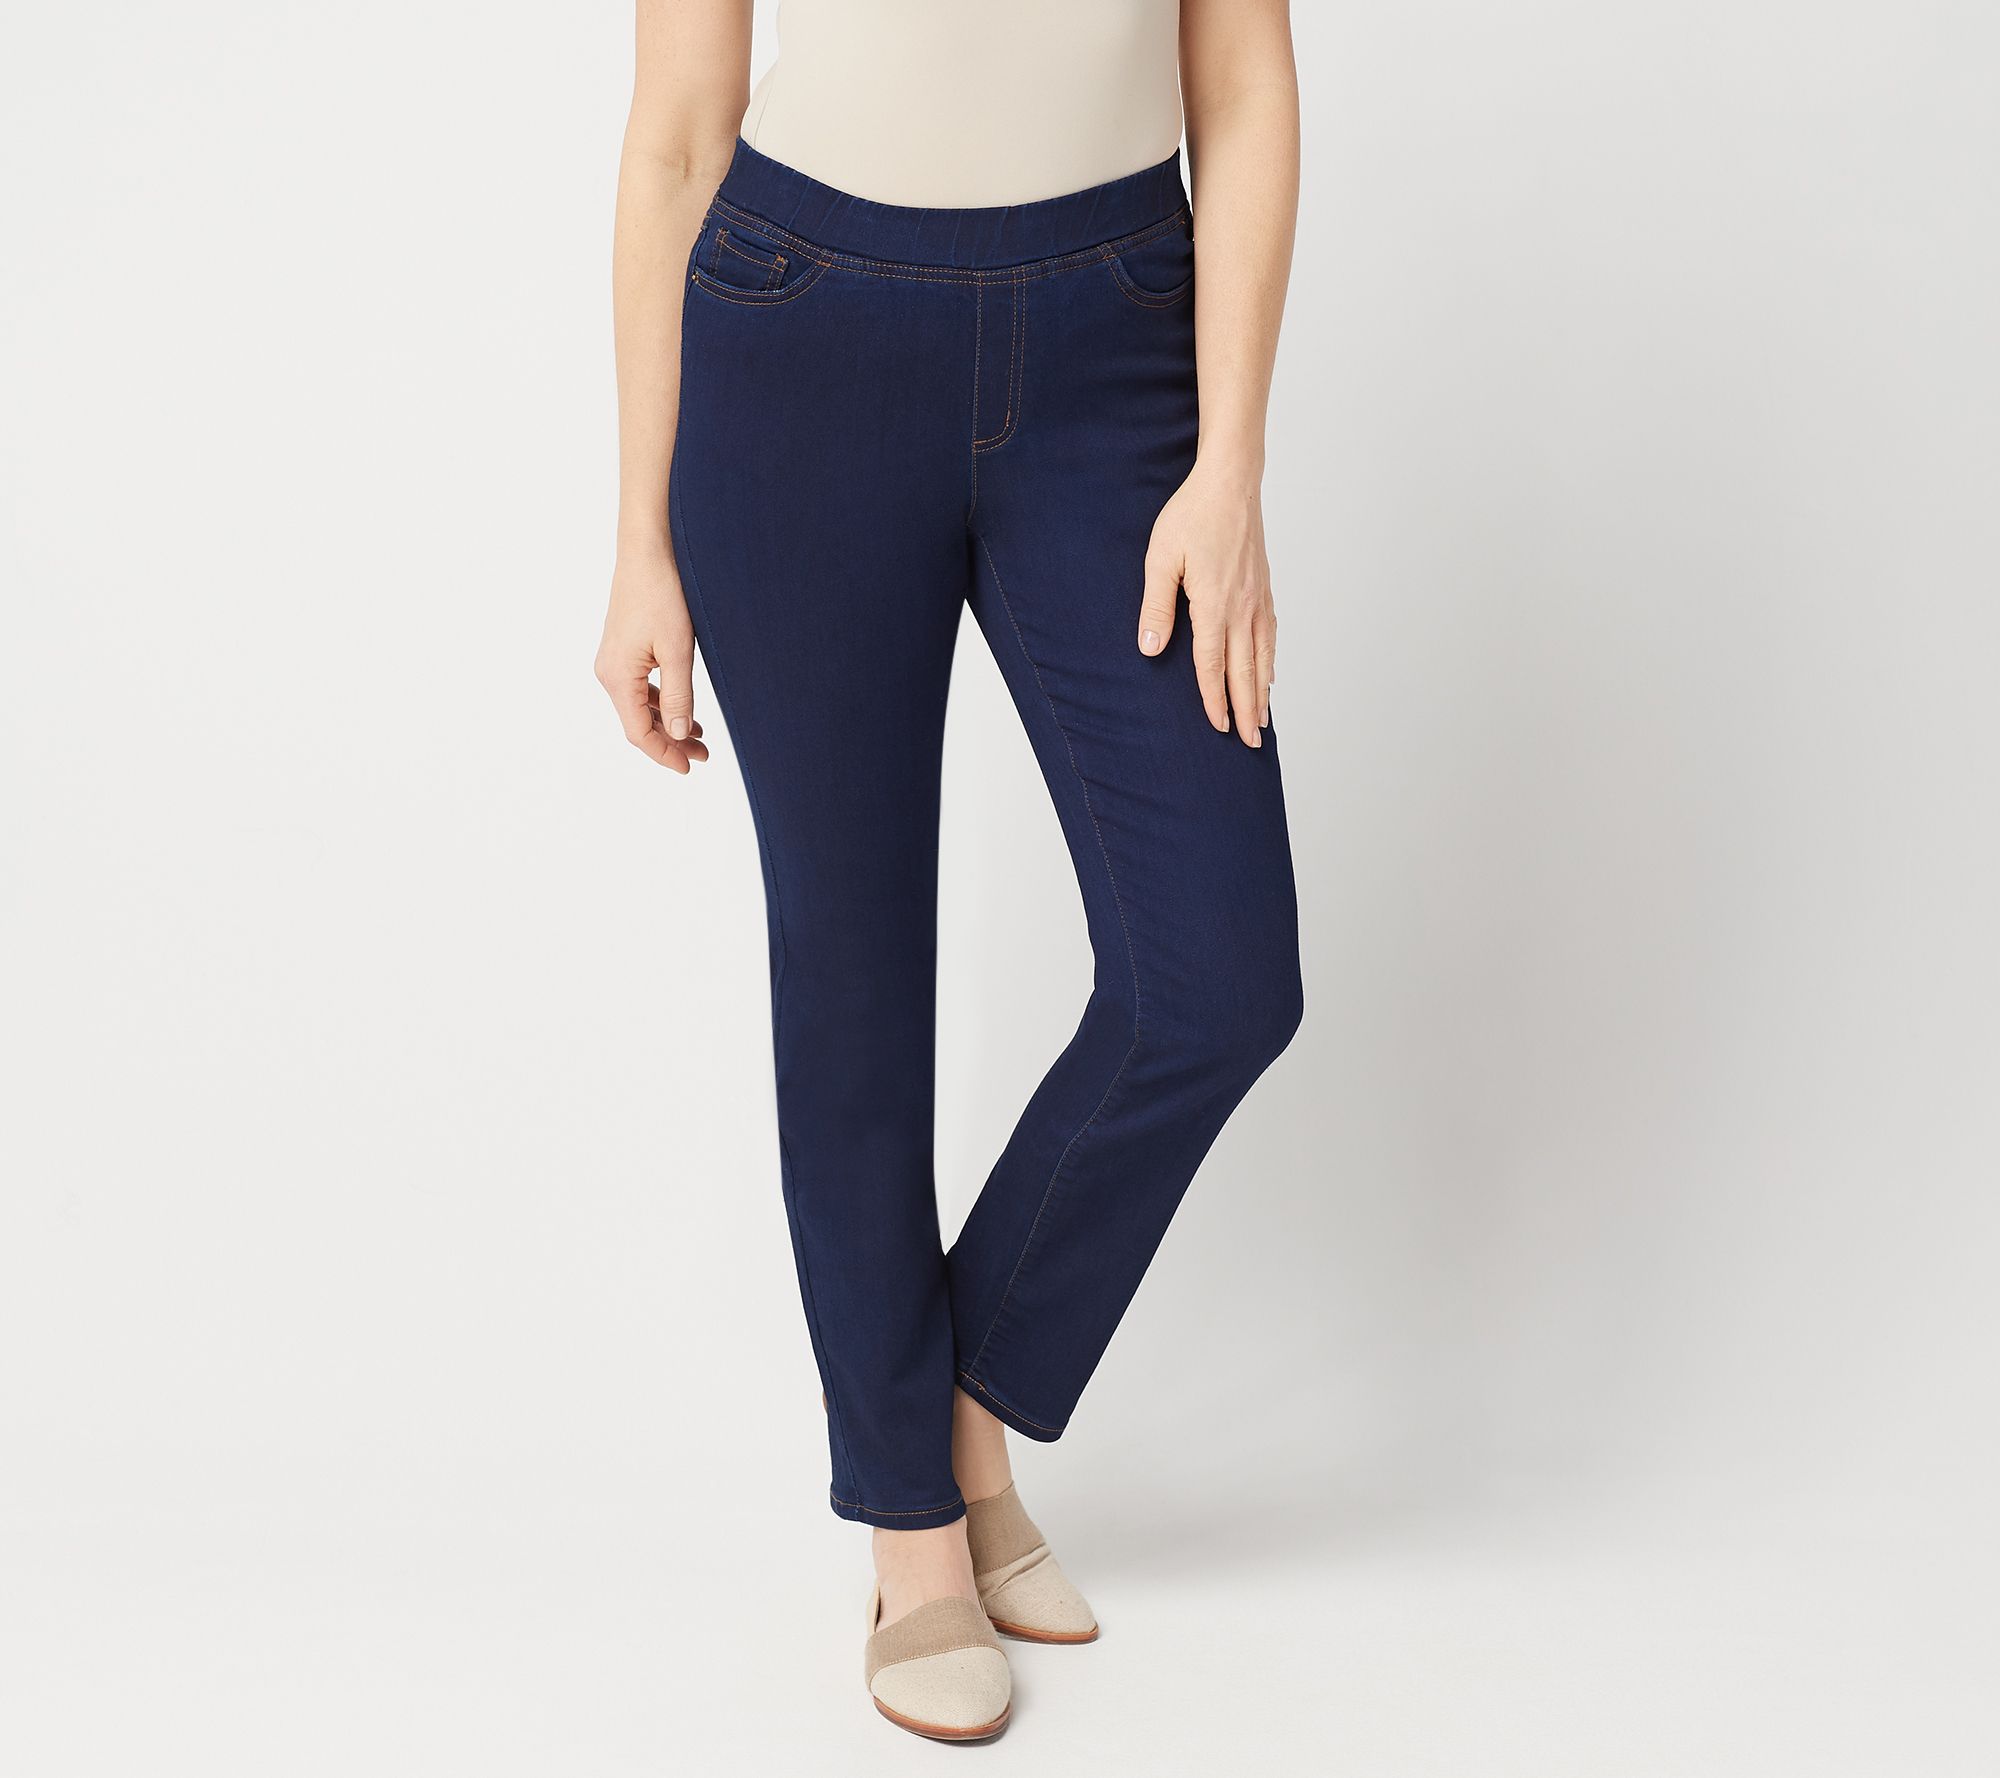 madewell size 28